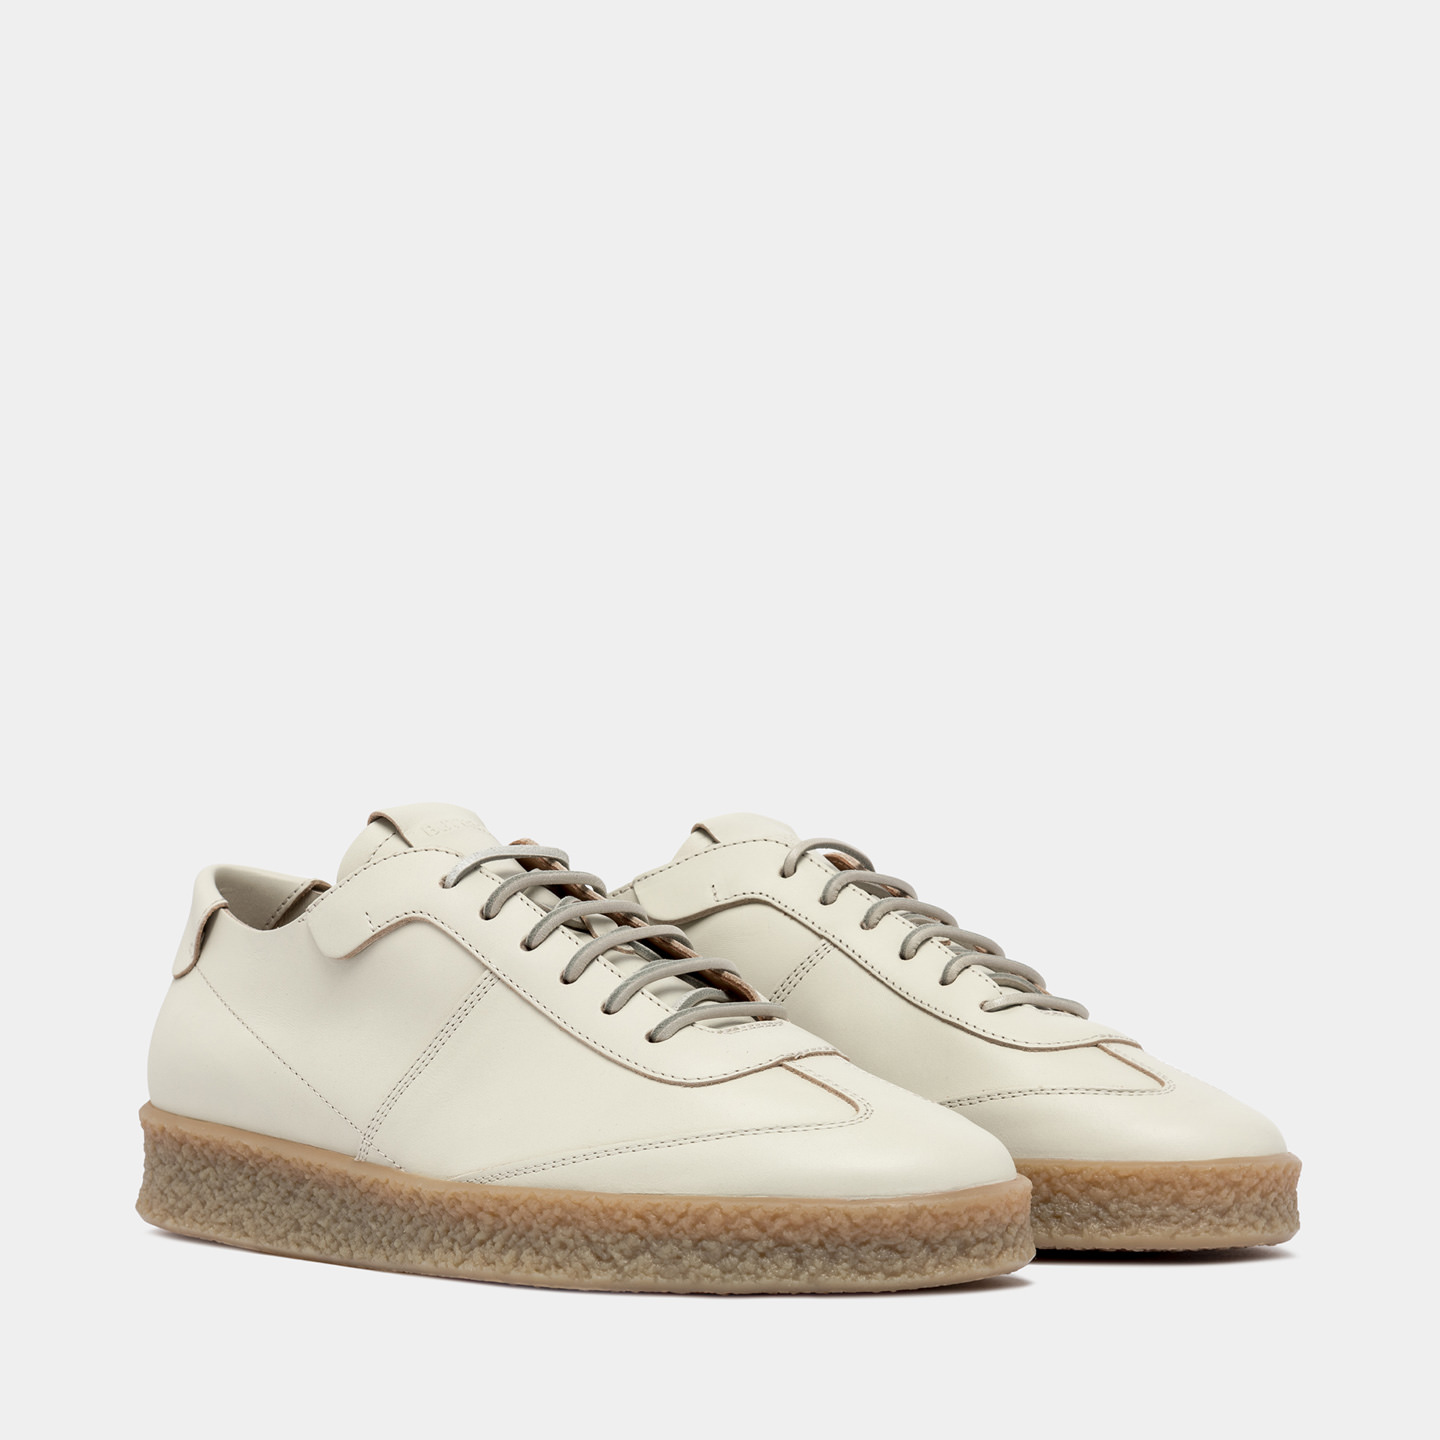 BUTTERO CRESPO SNEAKERS IN CREAM LEATHER B10500ROUS-UG1/03-ANISE